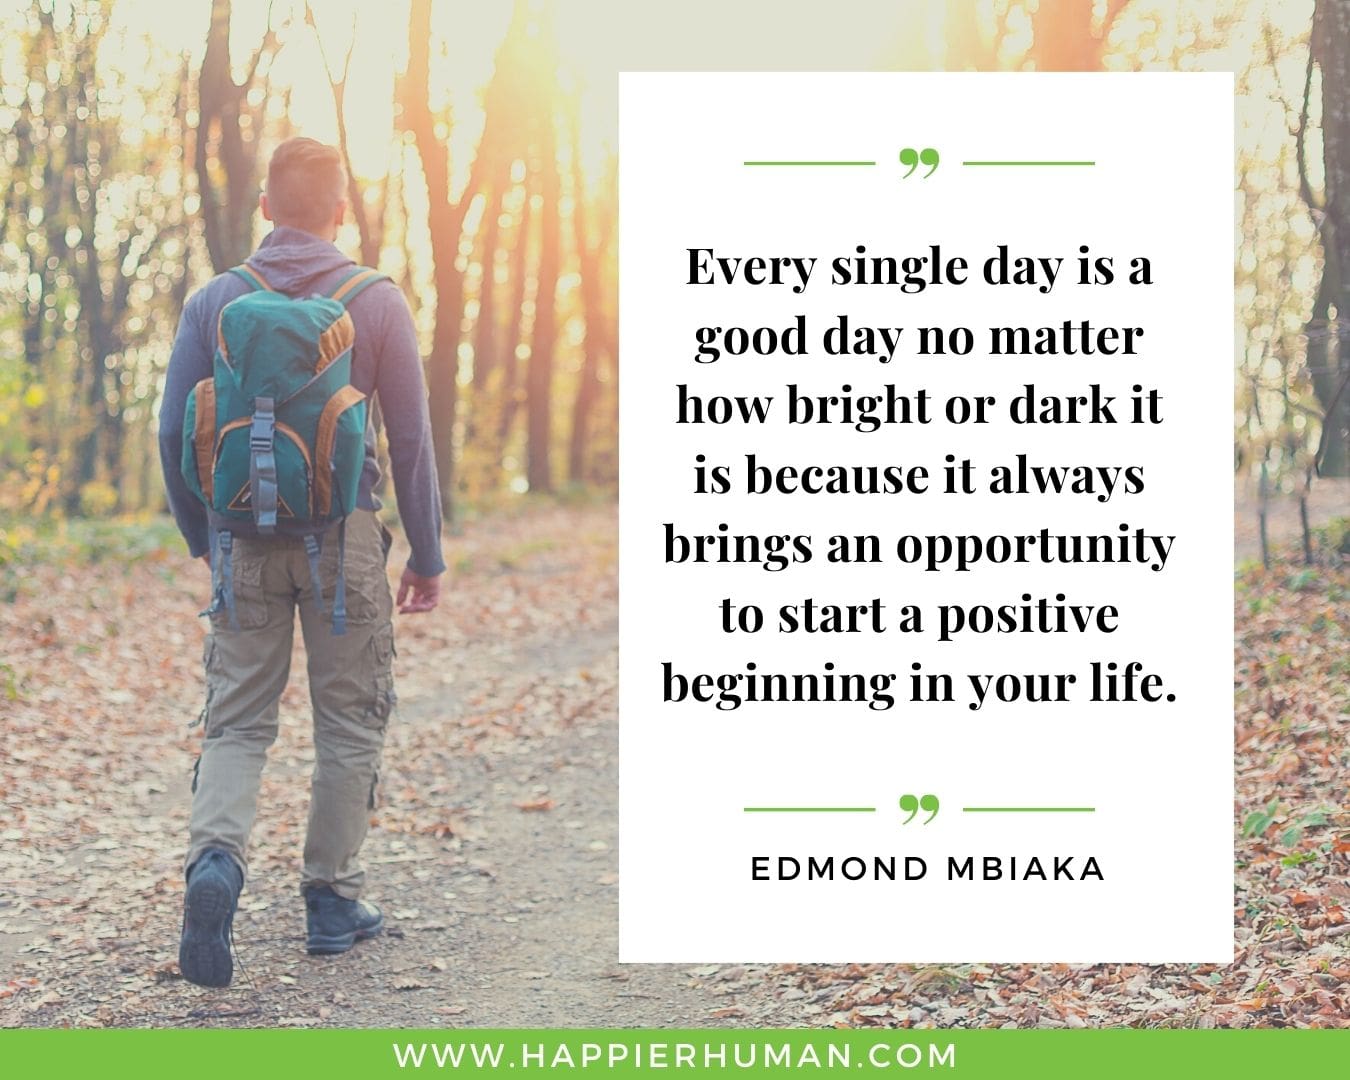 Great Day Quotes - “Every single day is a good day no matter how bright or dark it is because it always brings an opportunity to start a positive beginning in your life.” – Edmond Mbiaka